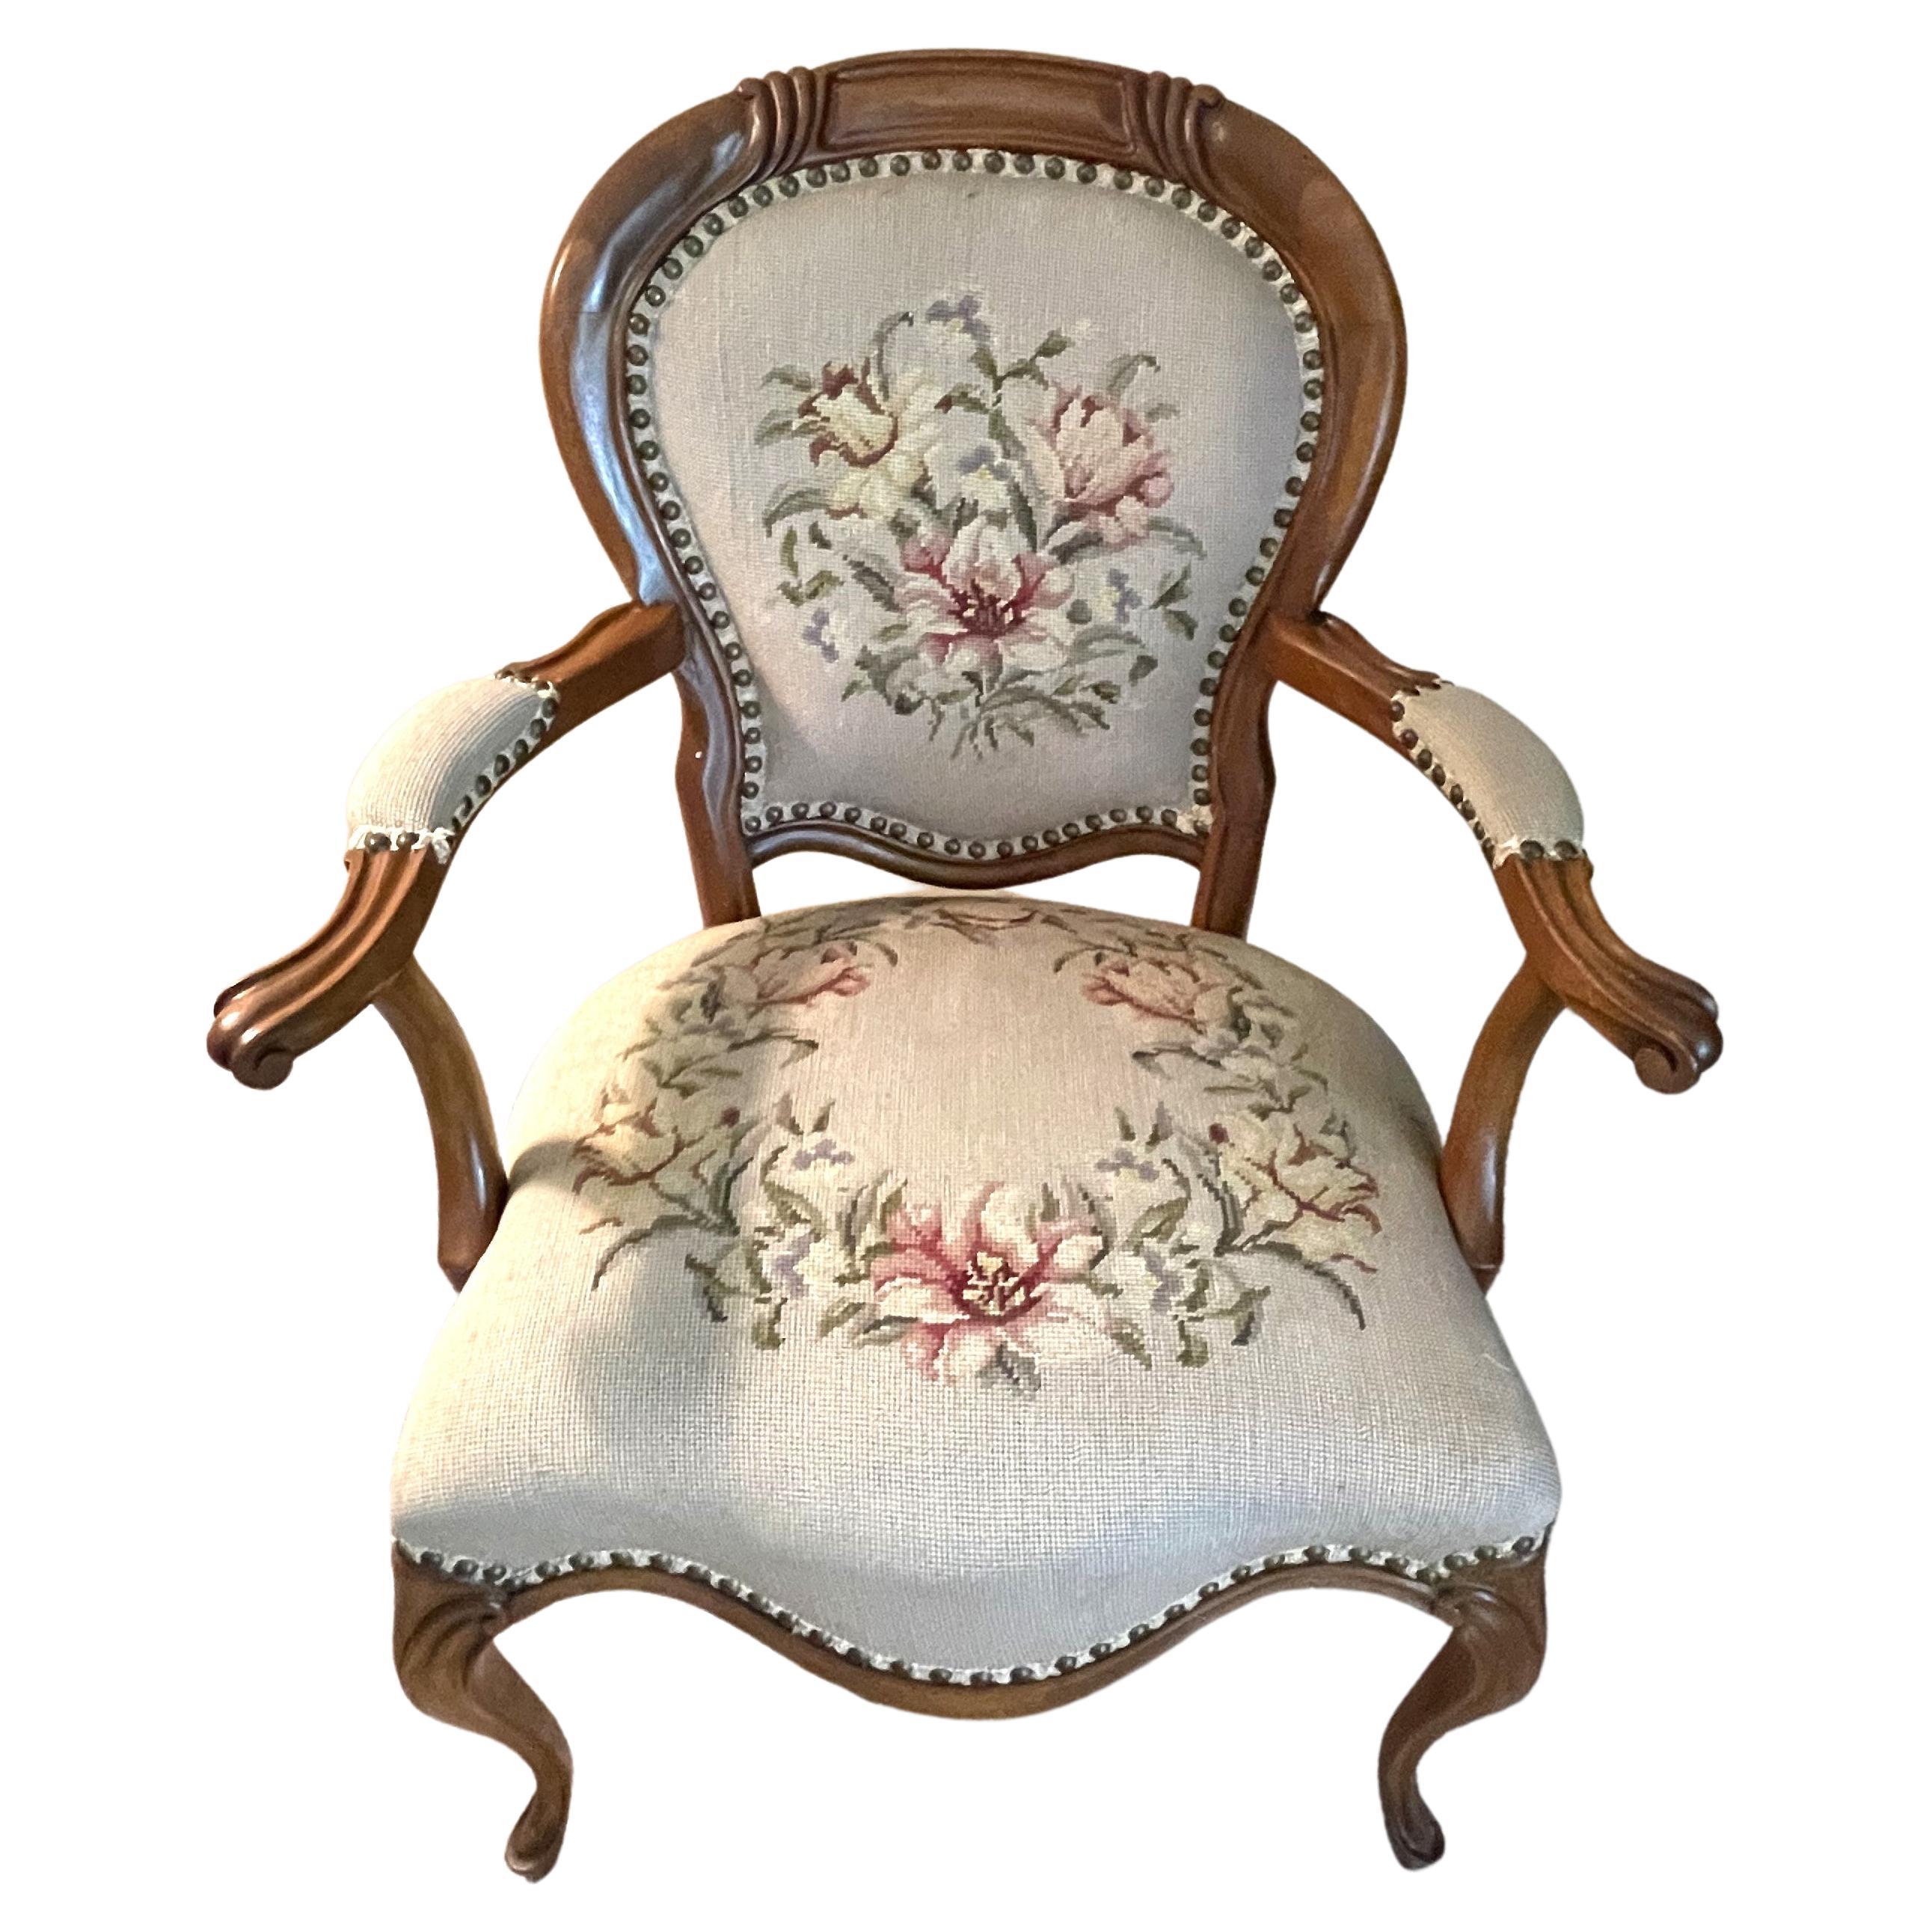 1920s French Walnut Accent Chair with Needlepoint Upholstery